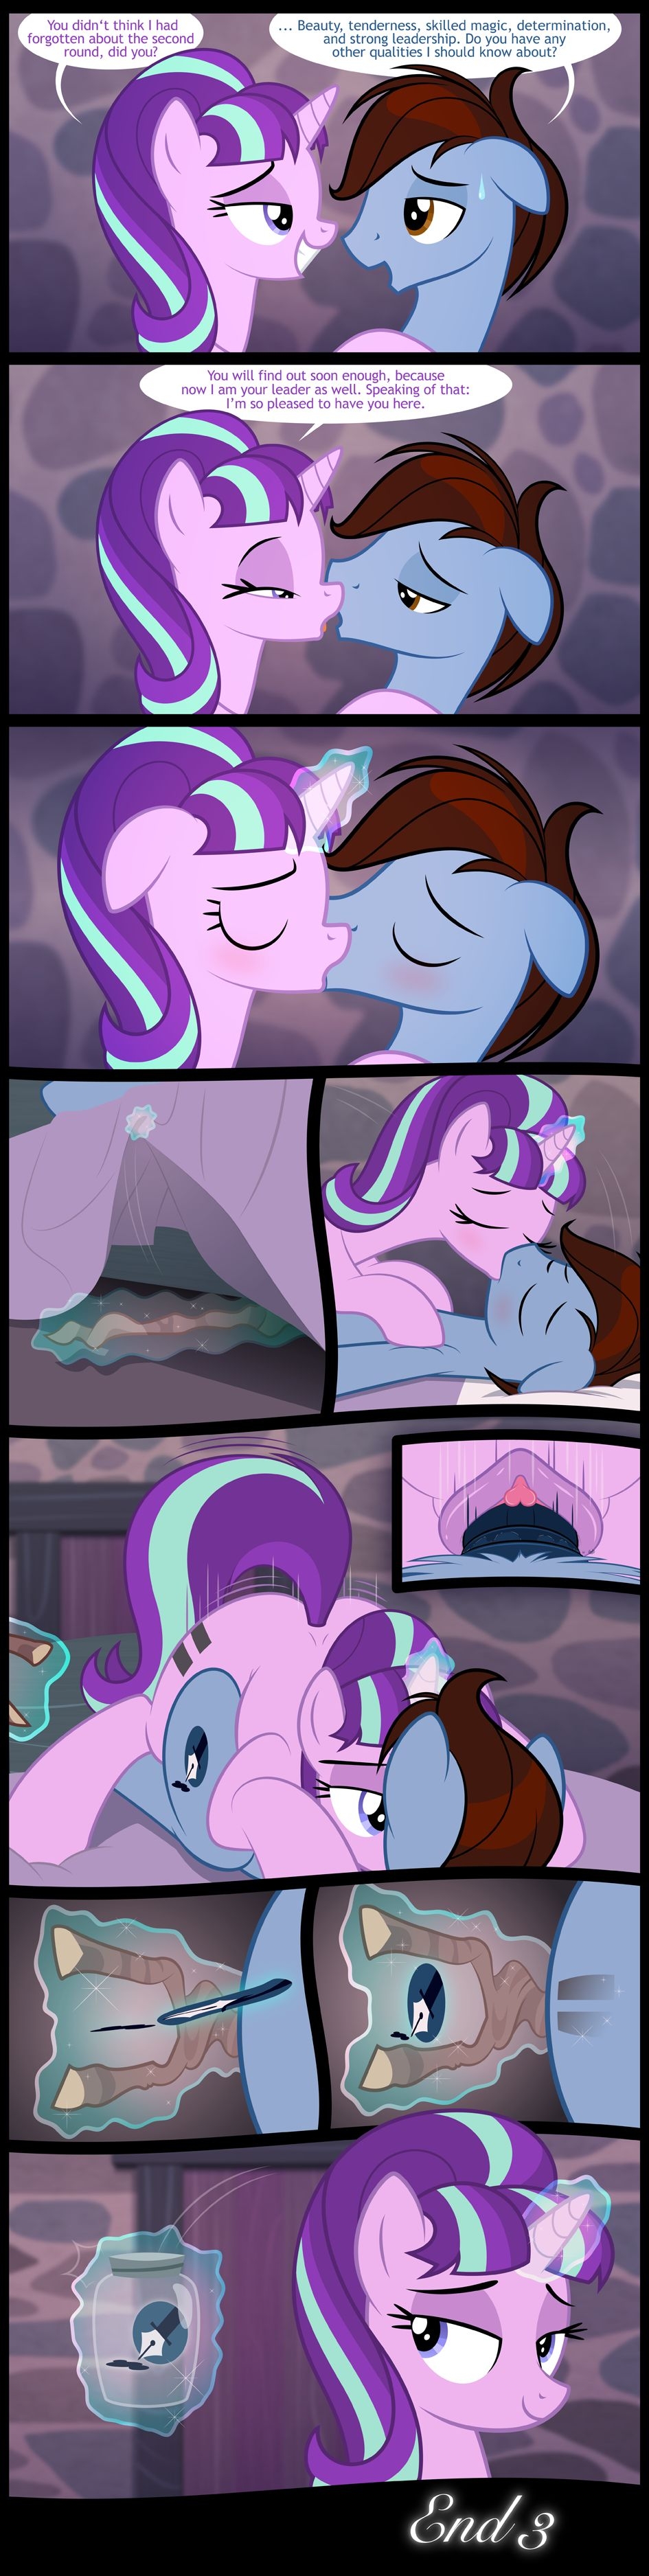 [Culu-Bluebeaver] The Newcomer (My Little Pony: Friendship is Magic) 19